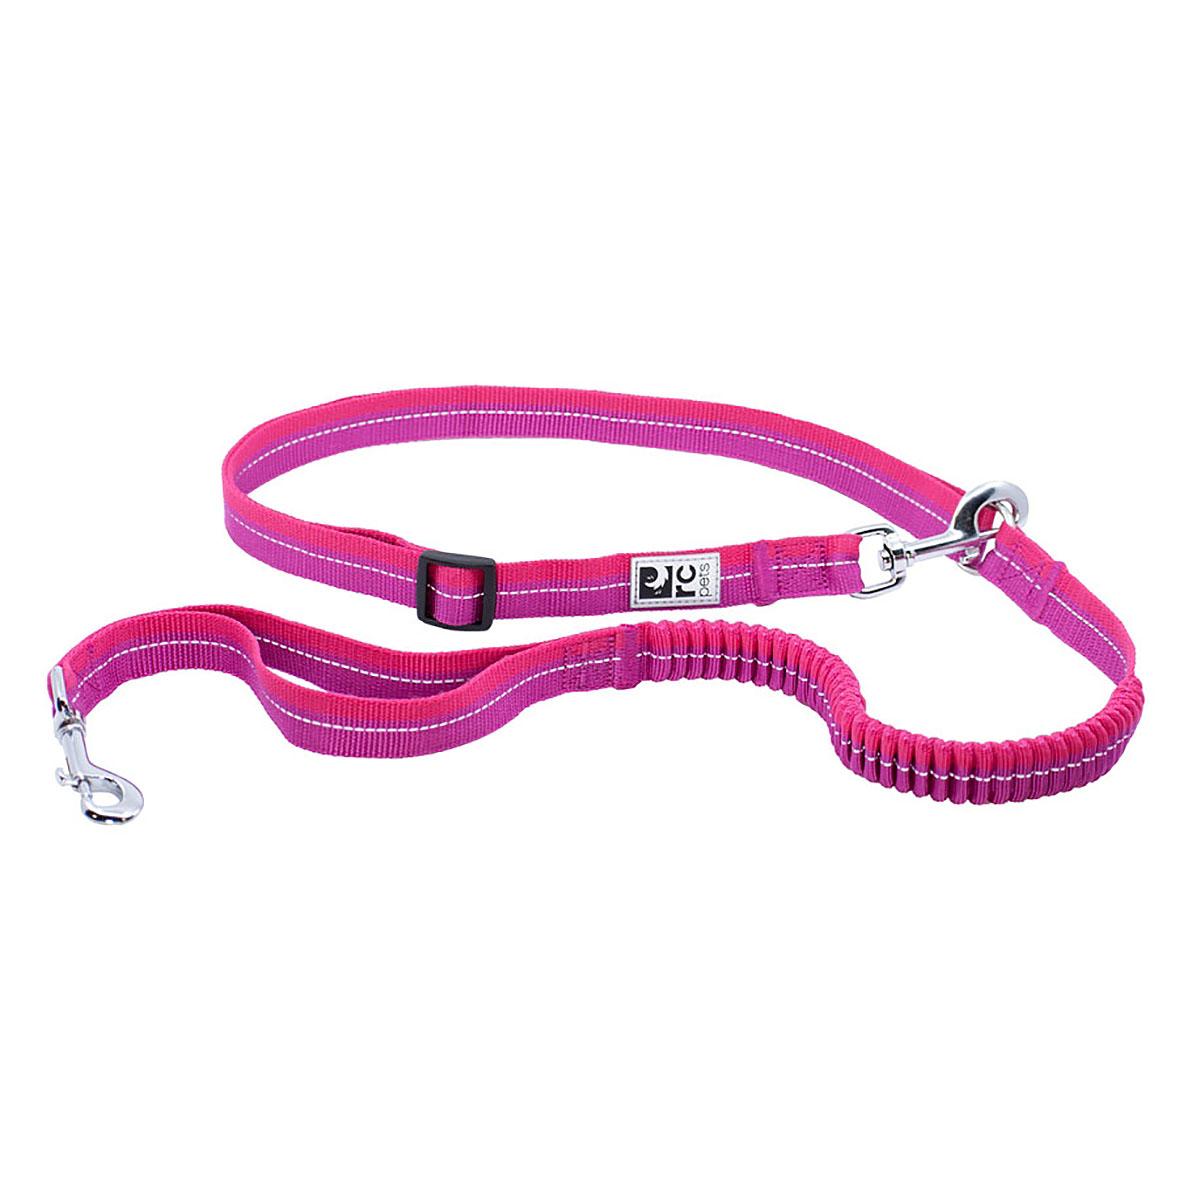 Bungee Active Dog Leash by RC Pets - Mulberry and Azalea